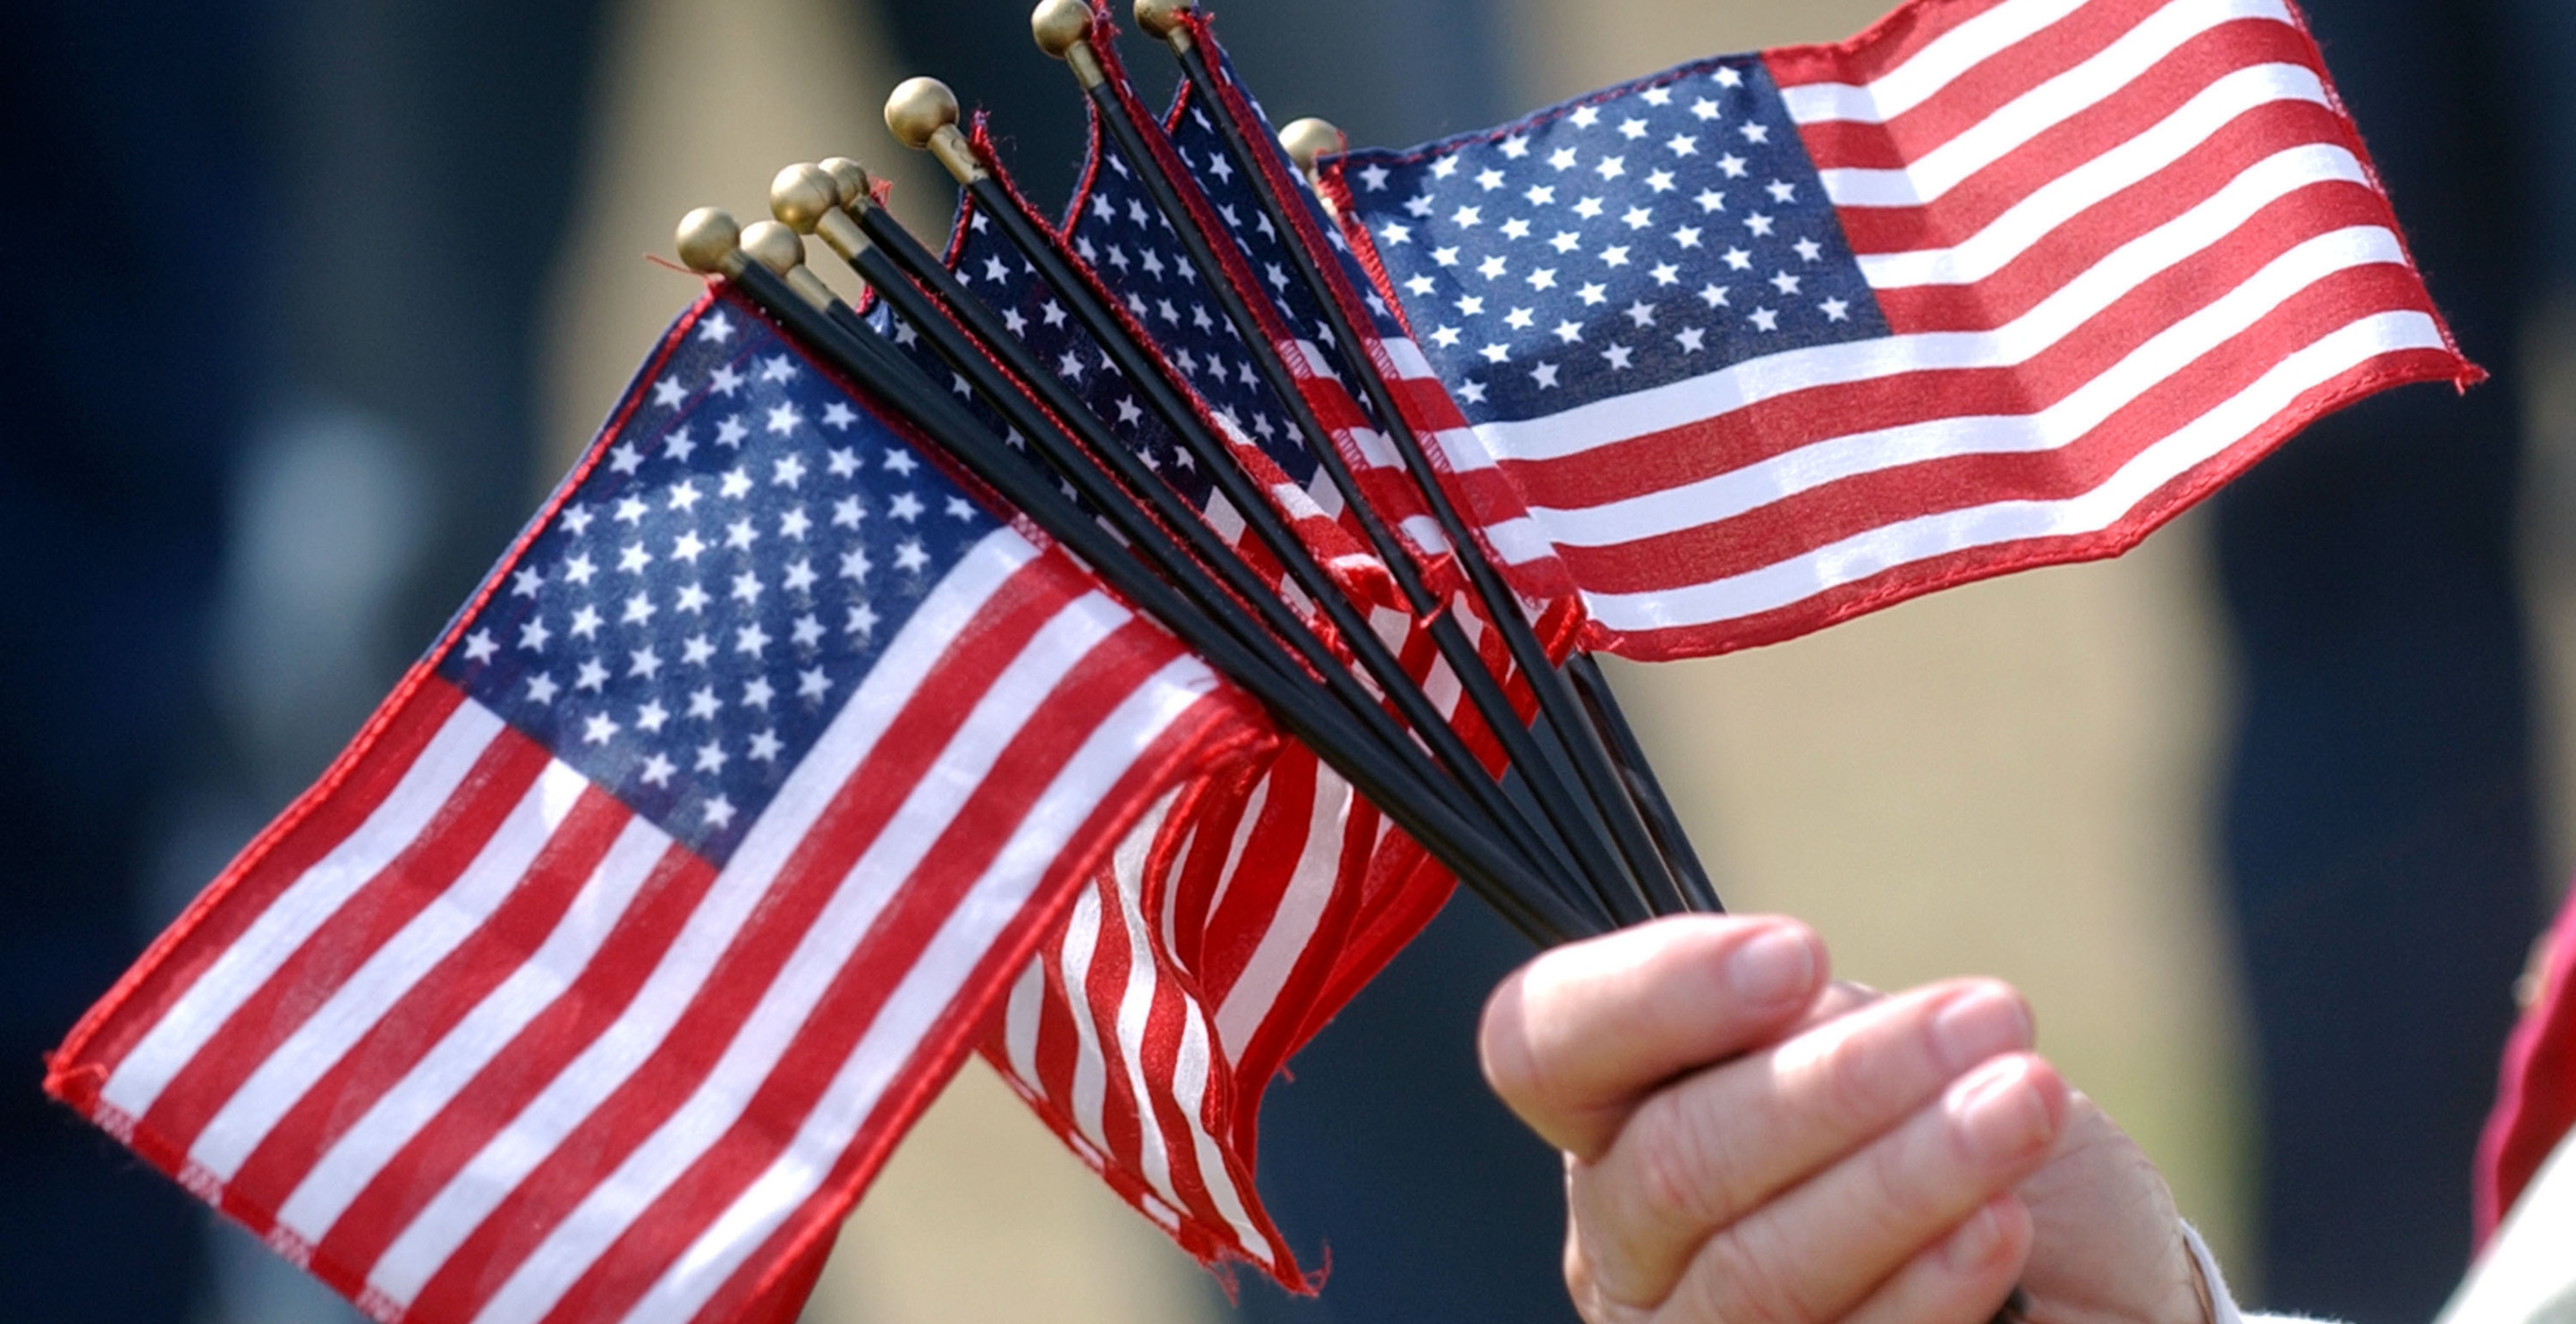 Alaskan National Park Allegedly Banned The American Flag And Now Officials Want Answers